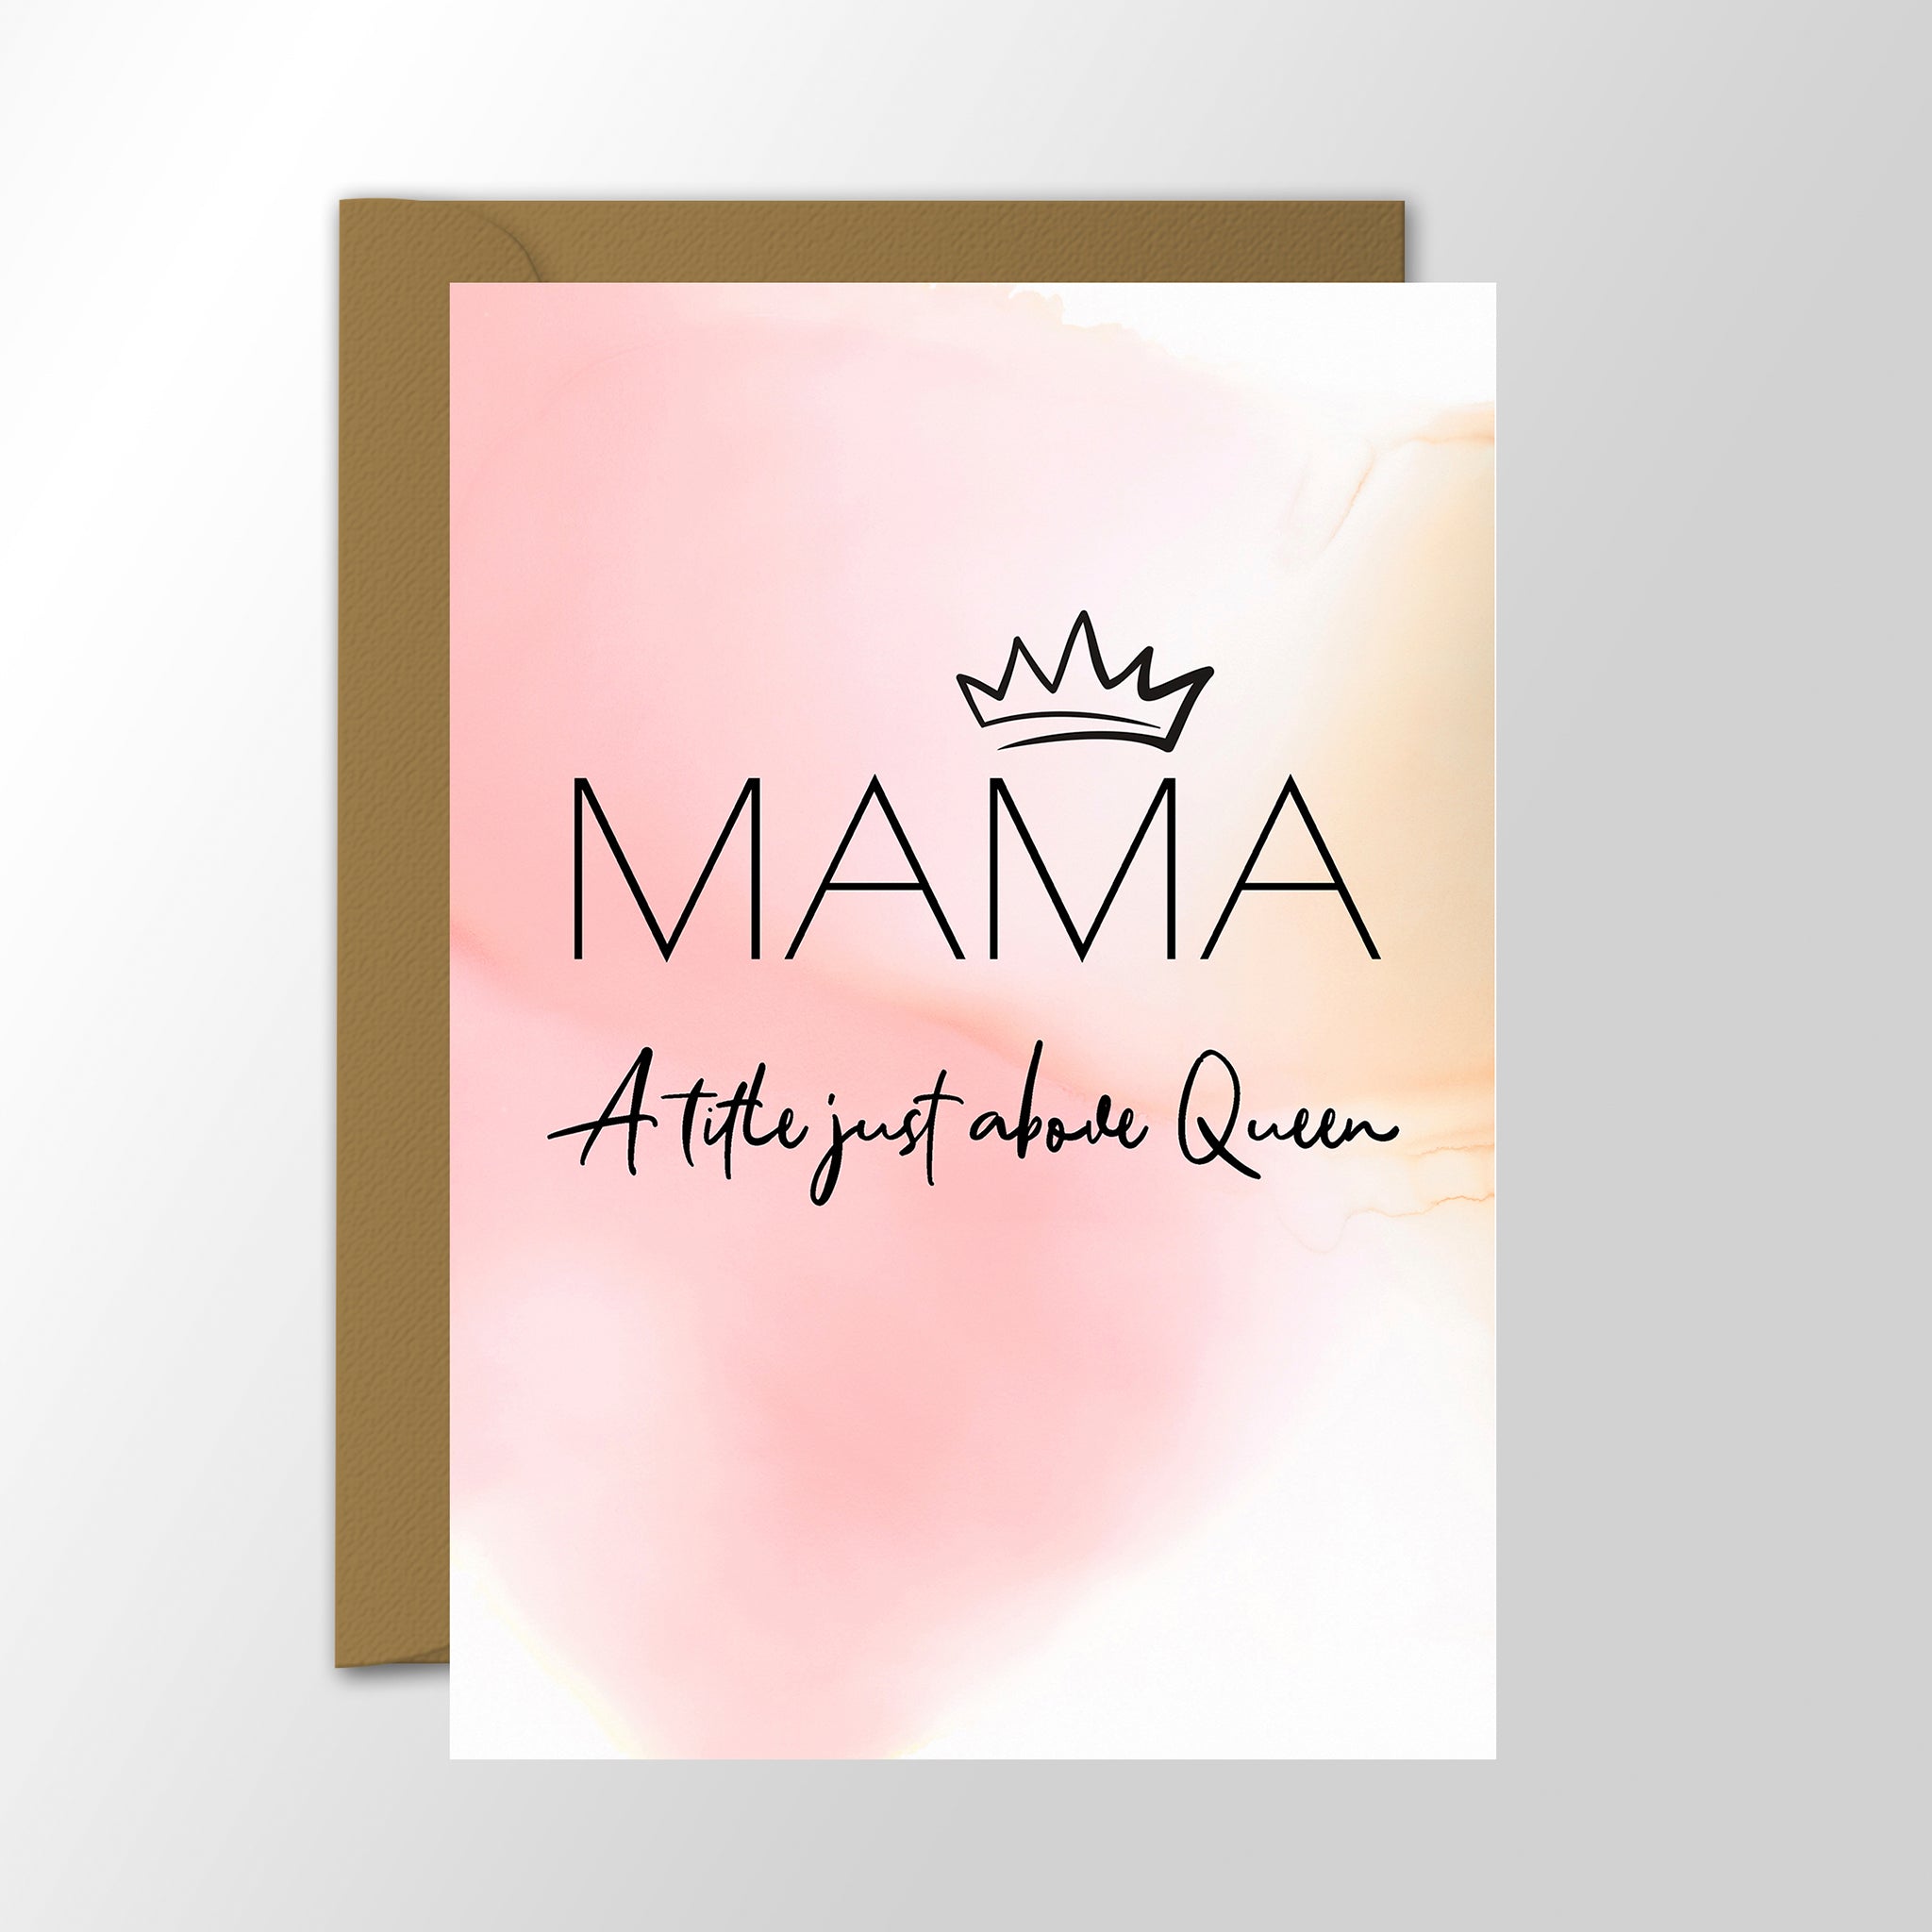 Mama - A title just above Queen - Mother's Day Card